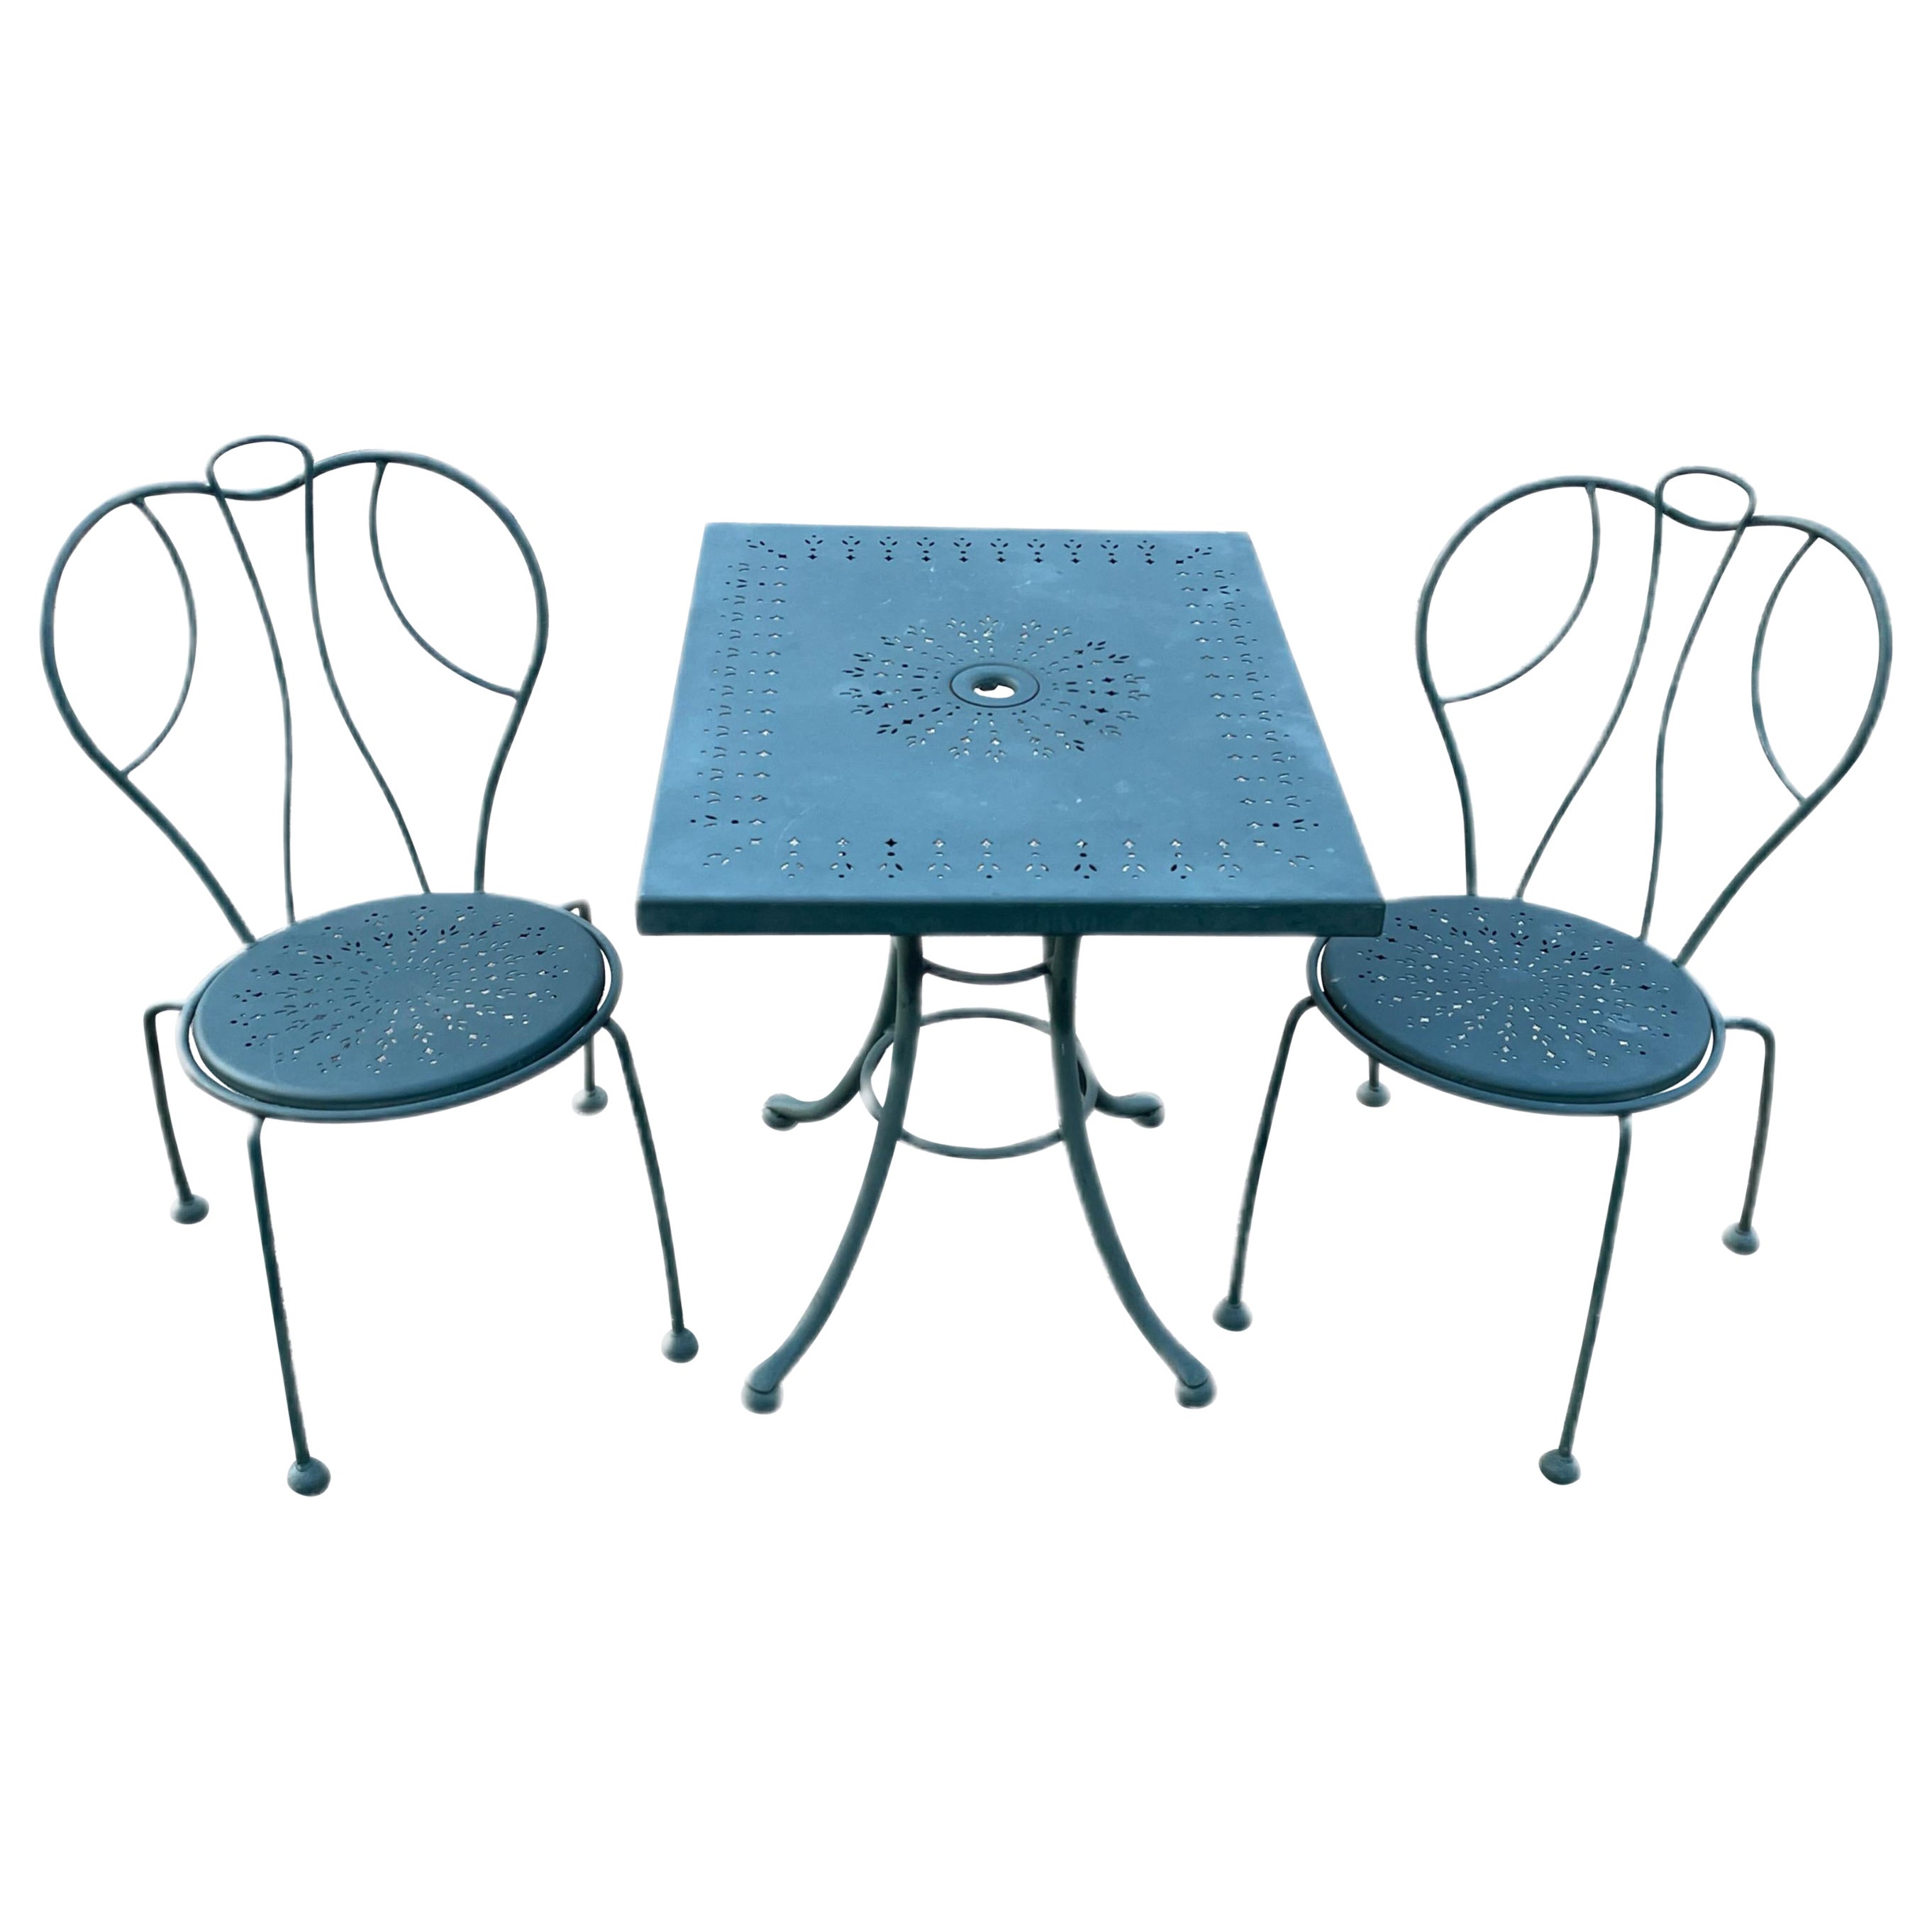 What is the best quality patio furniture?